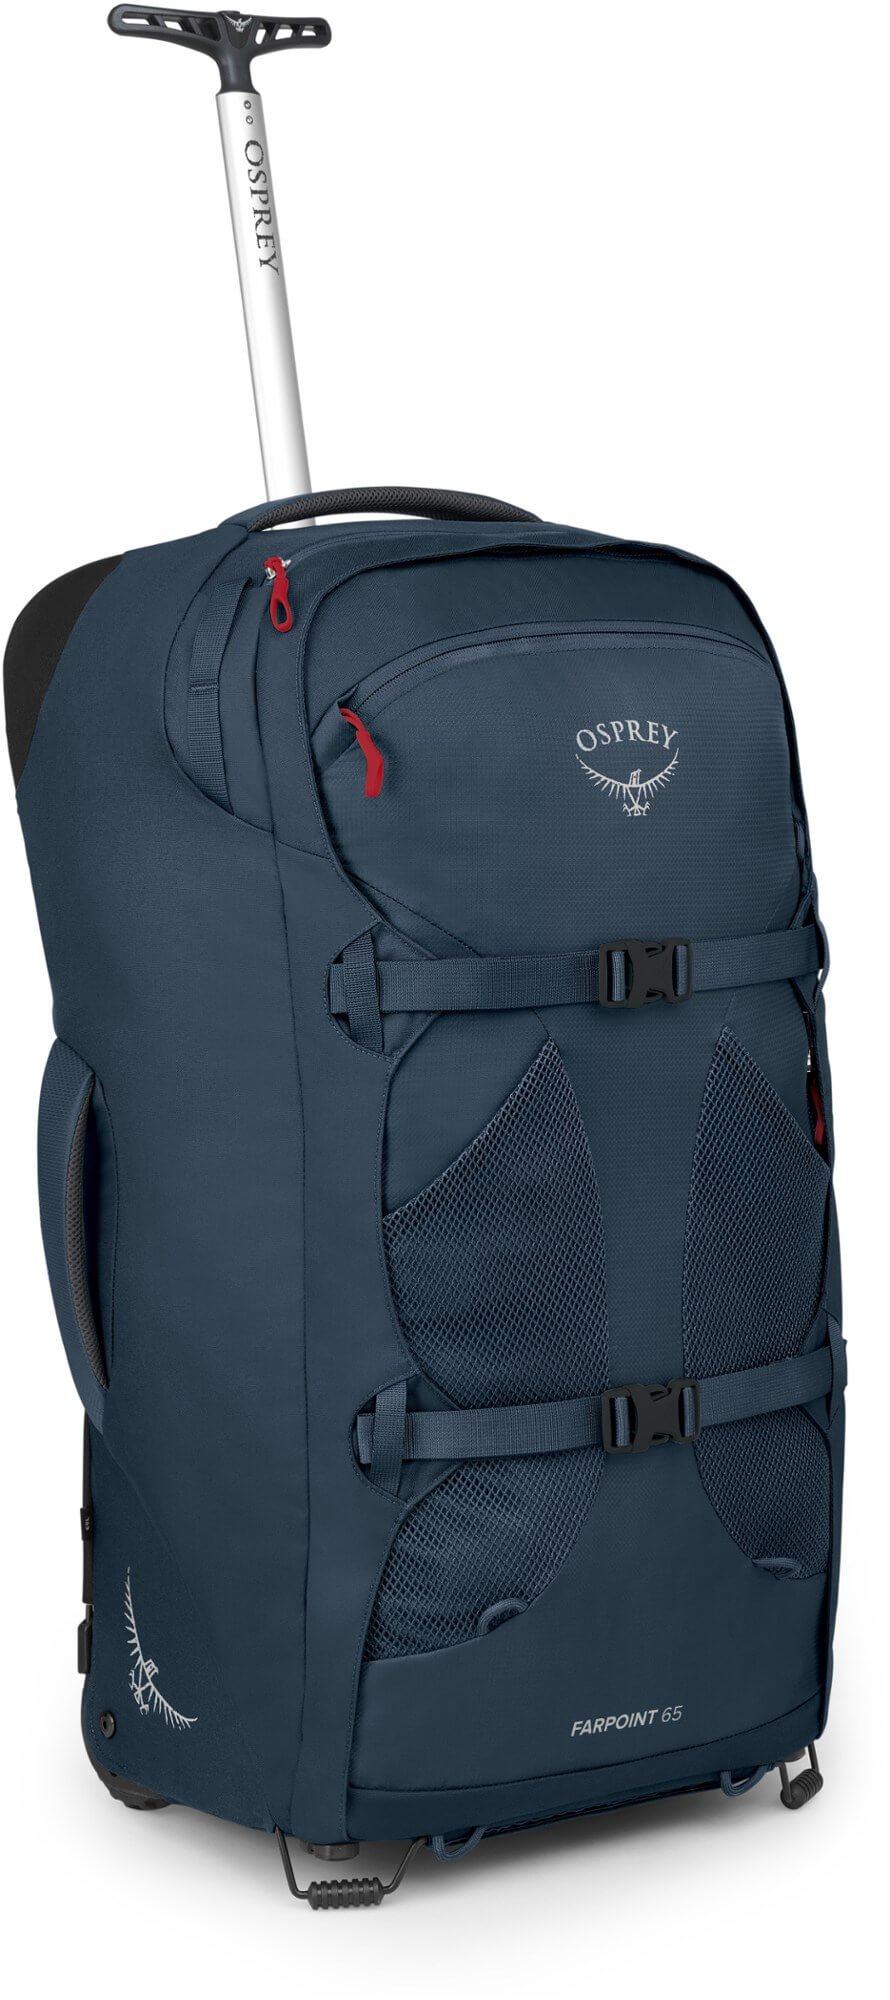 Osprey Farpoint 65 Wheeled Travel Pack